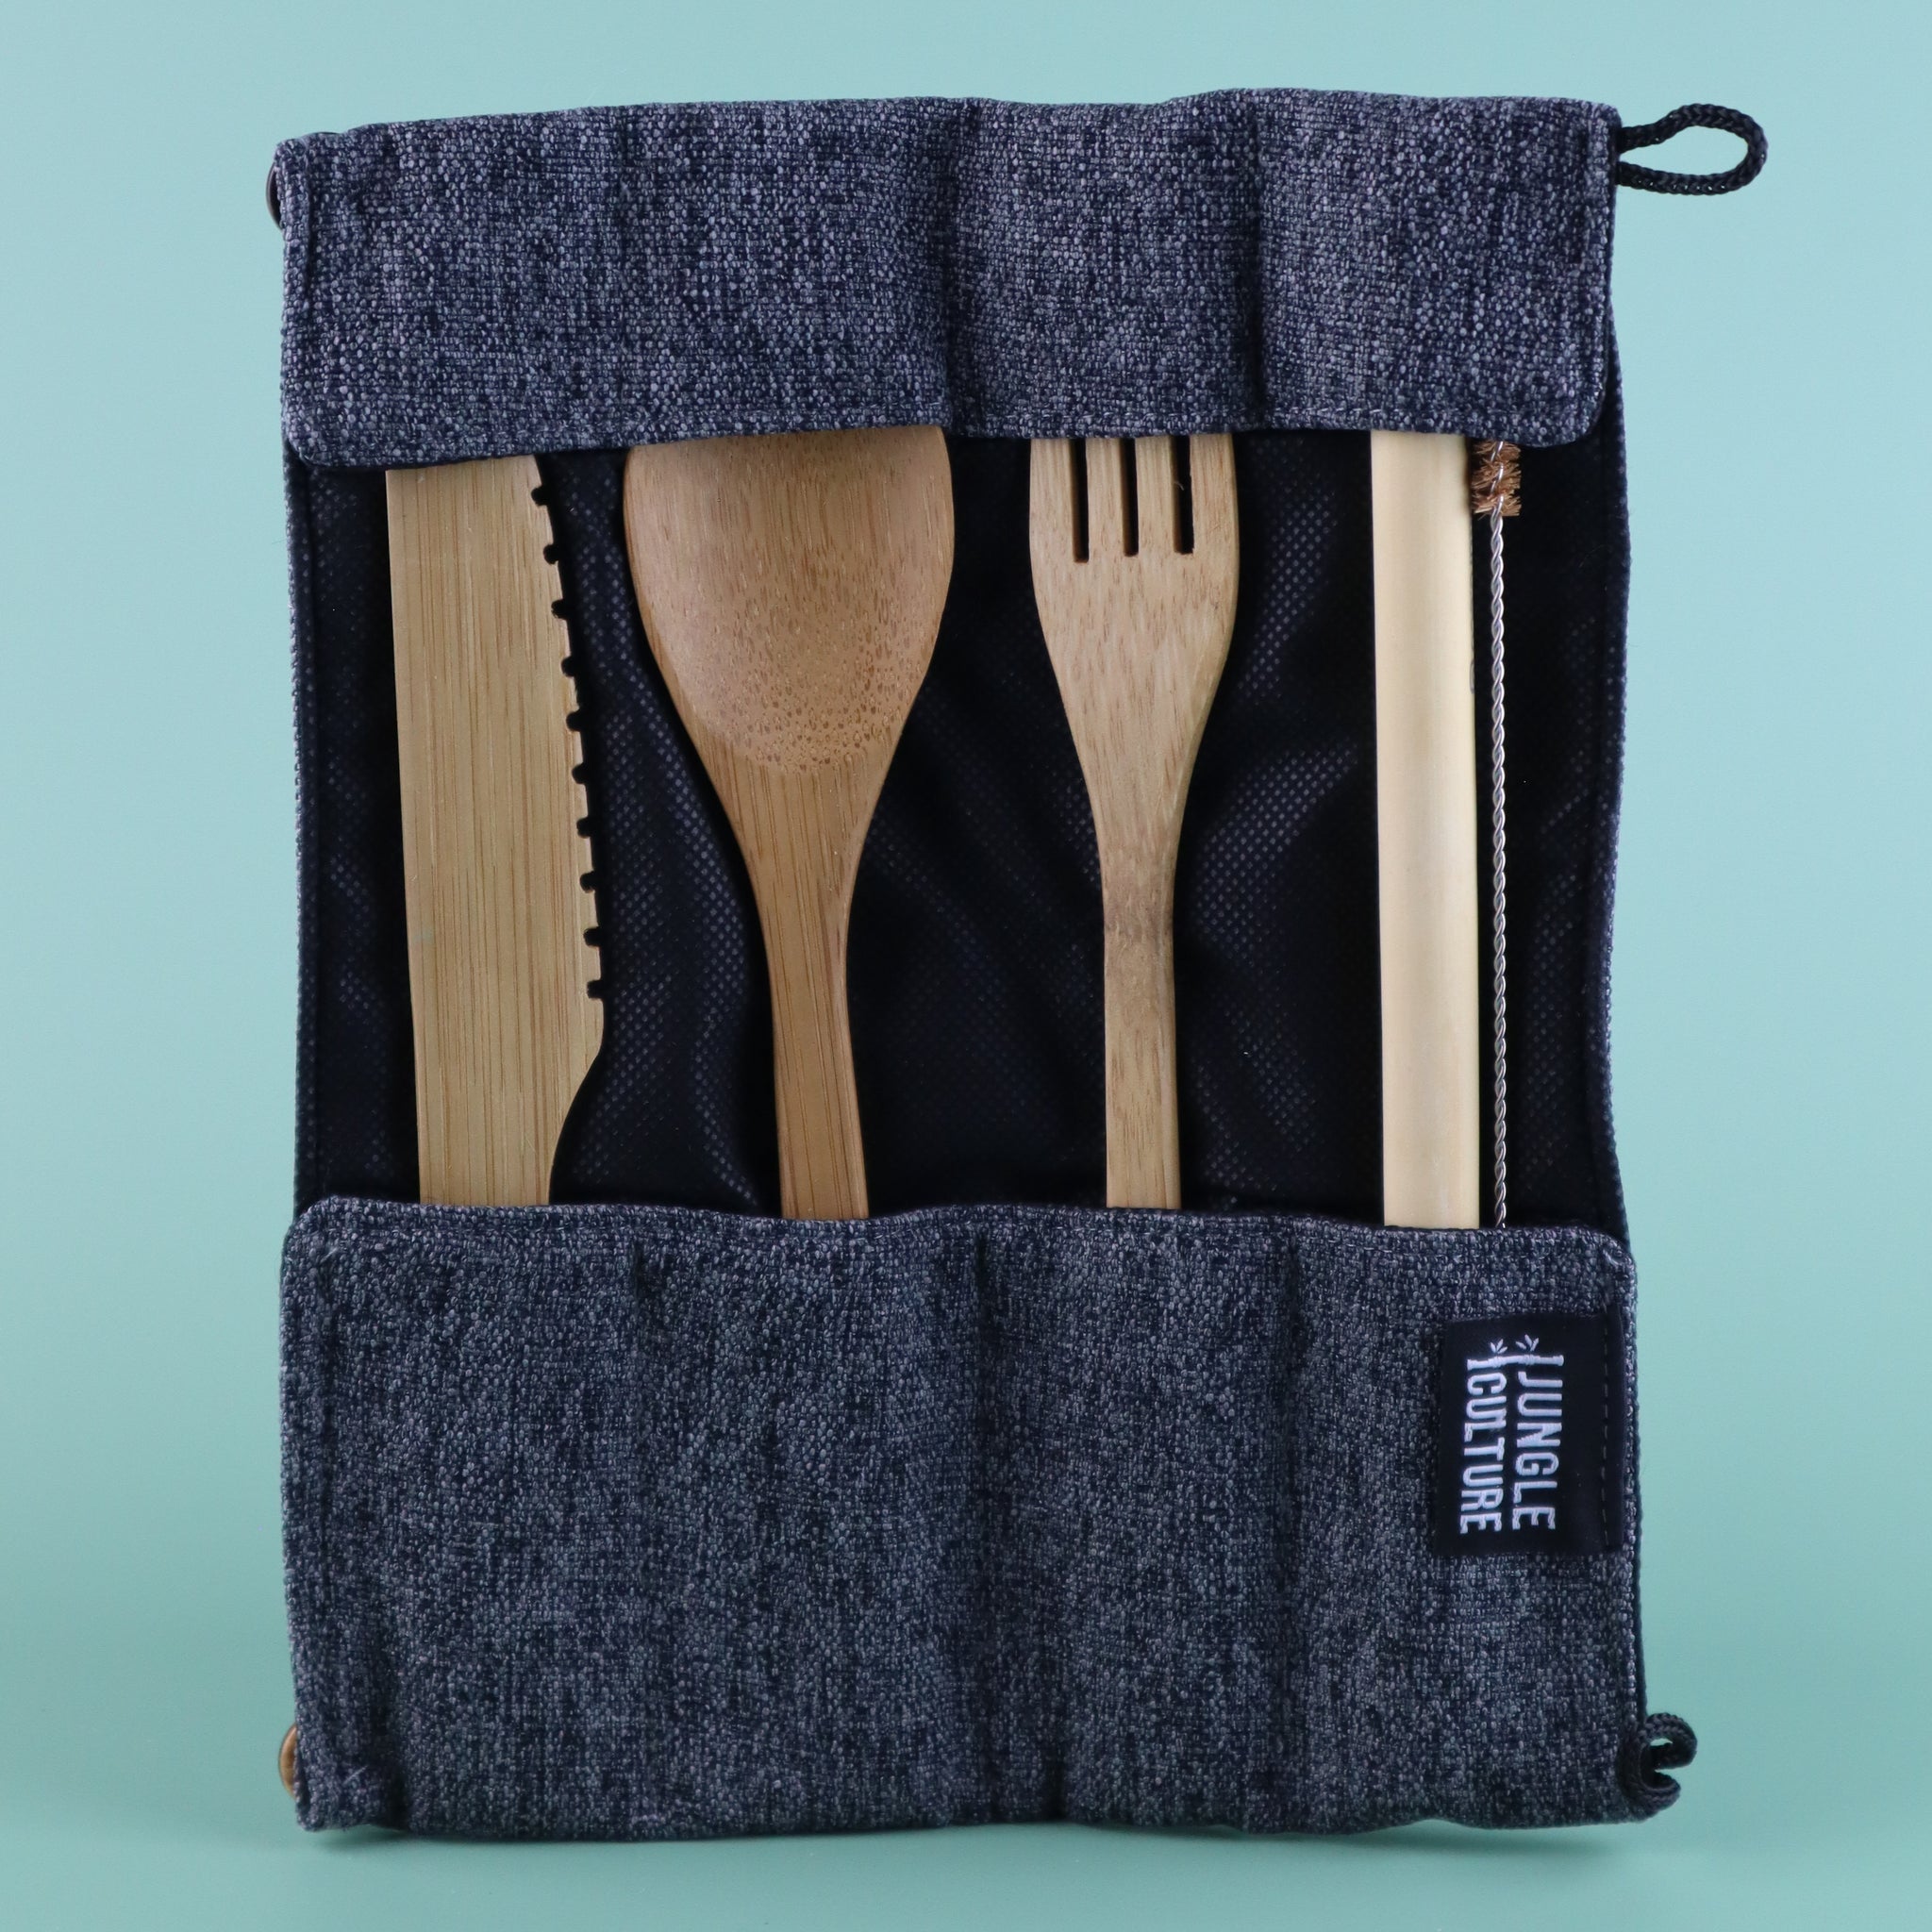 JUNGLE CULTURE BAMBOO REUSABLE CUTLERY SET WITH POUCH (6 PIECES)